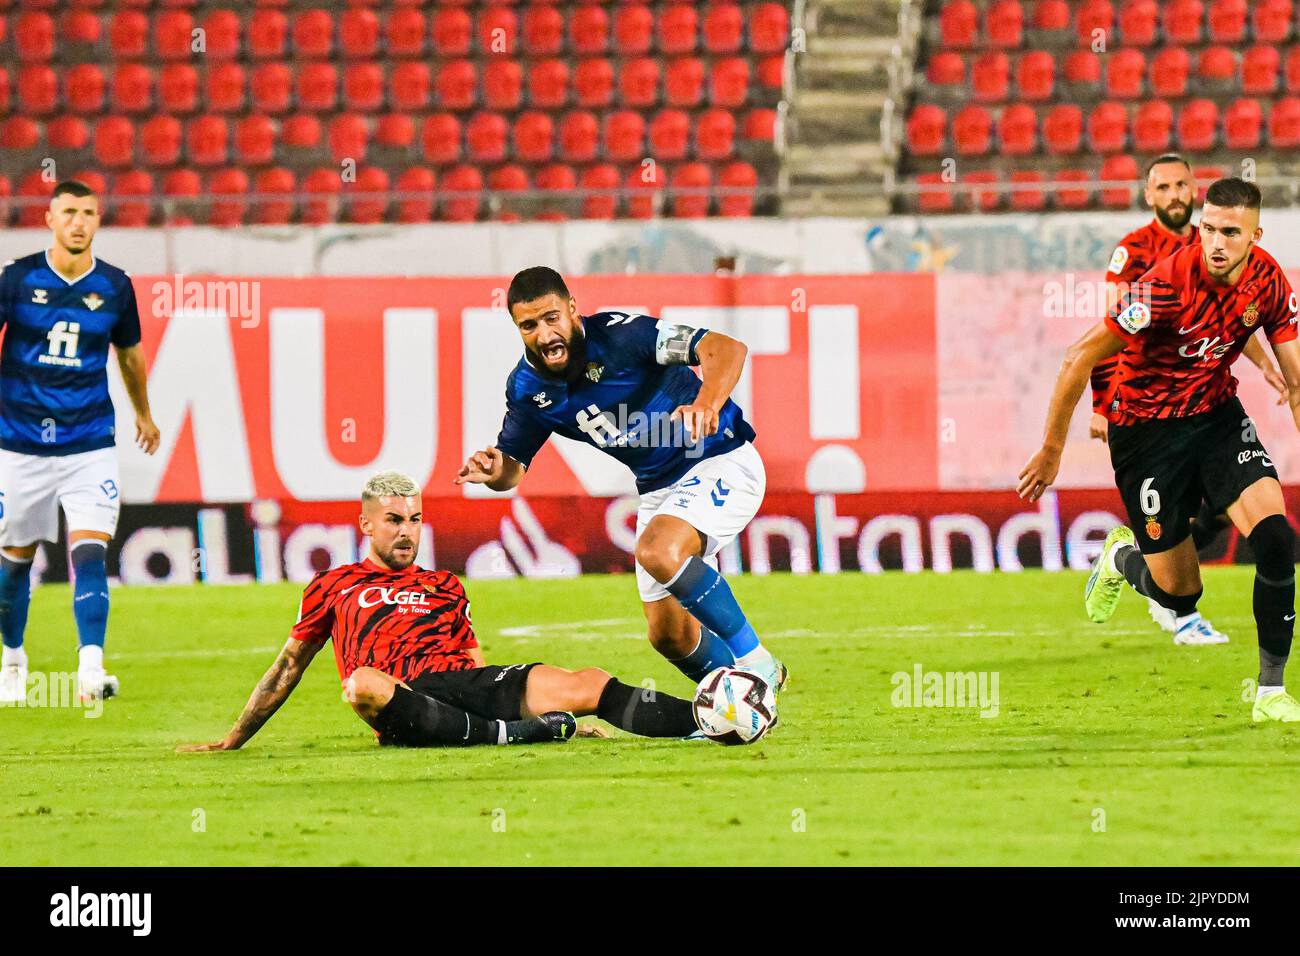 MALLORCA, SPAIN - AUGUST 20: Dani Rodriguez of RCD Mallorca and Nabil Fekir of Real Betis in the match between RCD Mallorca and Real Betis of La Liga Santander on August 20, 2022 at Visit Mallorca Stadium Son Moix in Mallorca, Spain. (Photo by Samuel Carreño/PxImages) Stock Photo